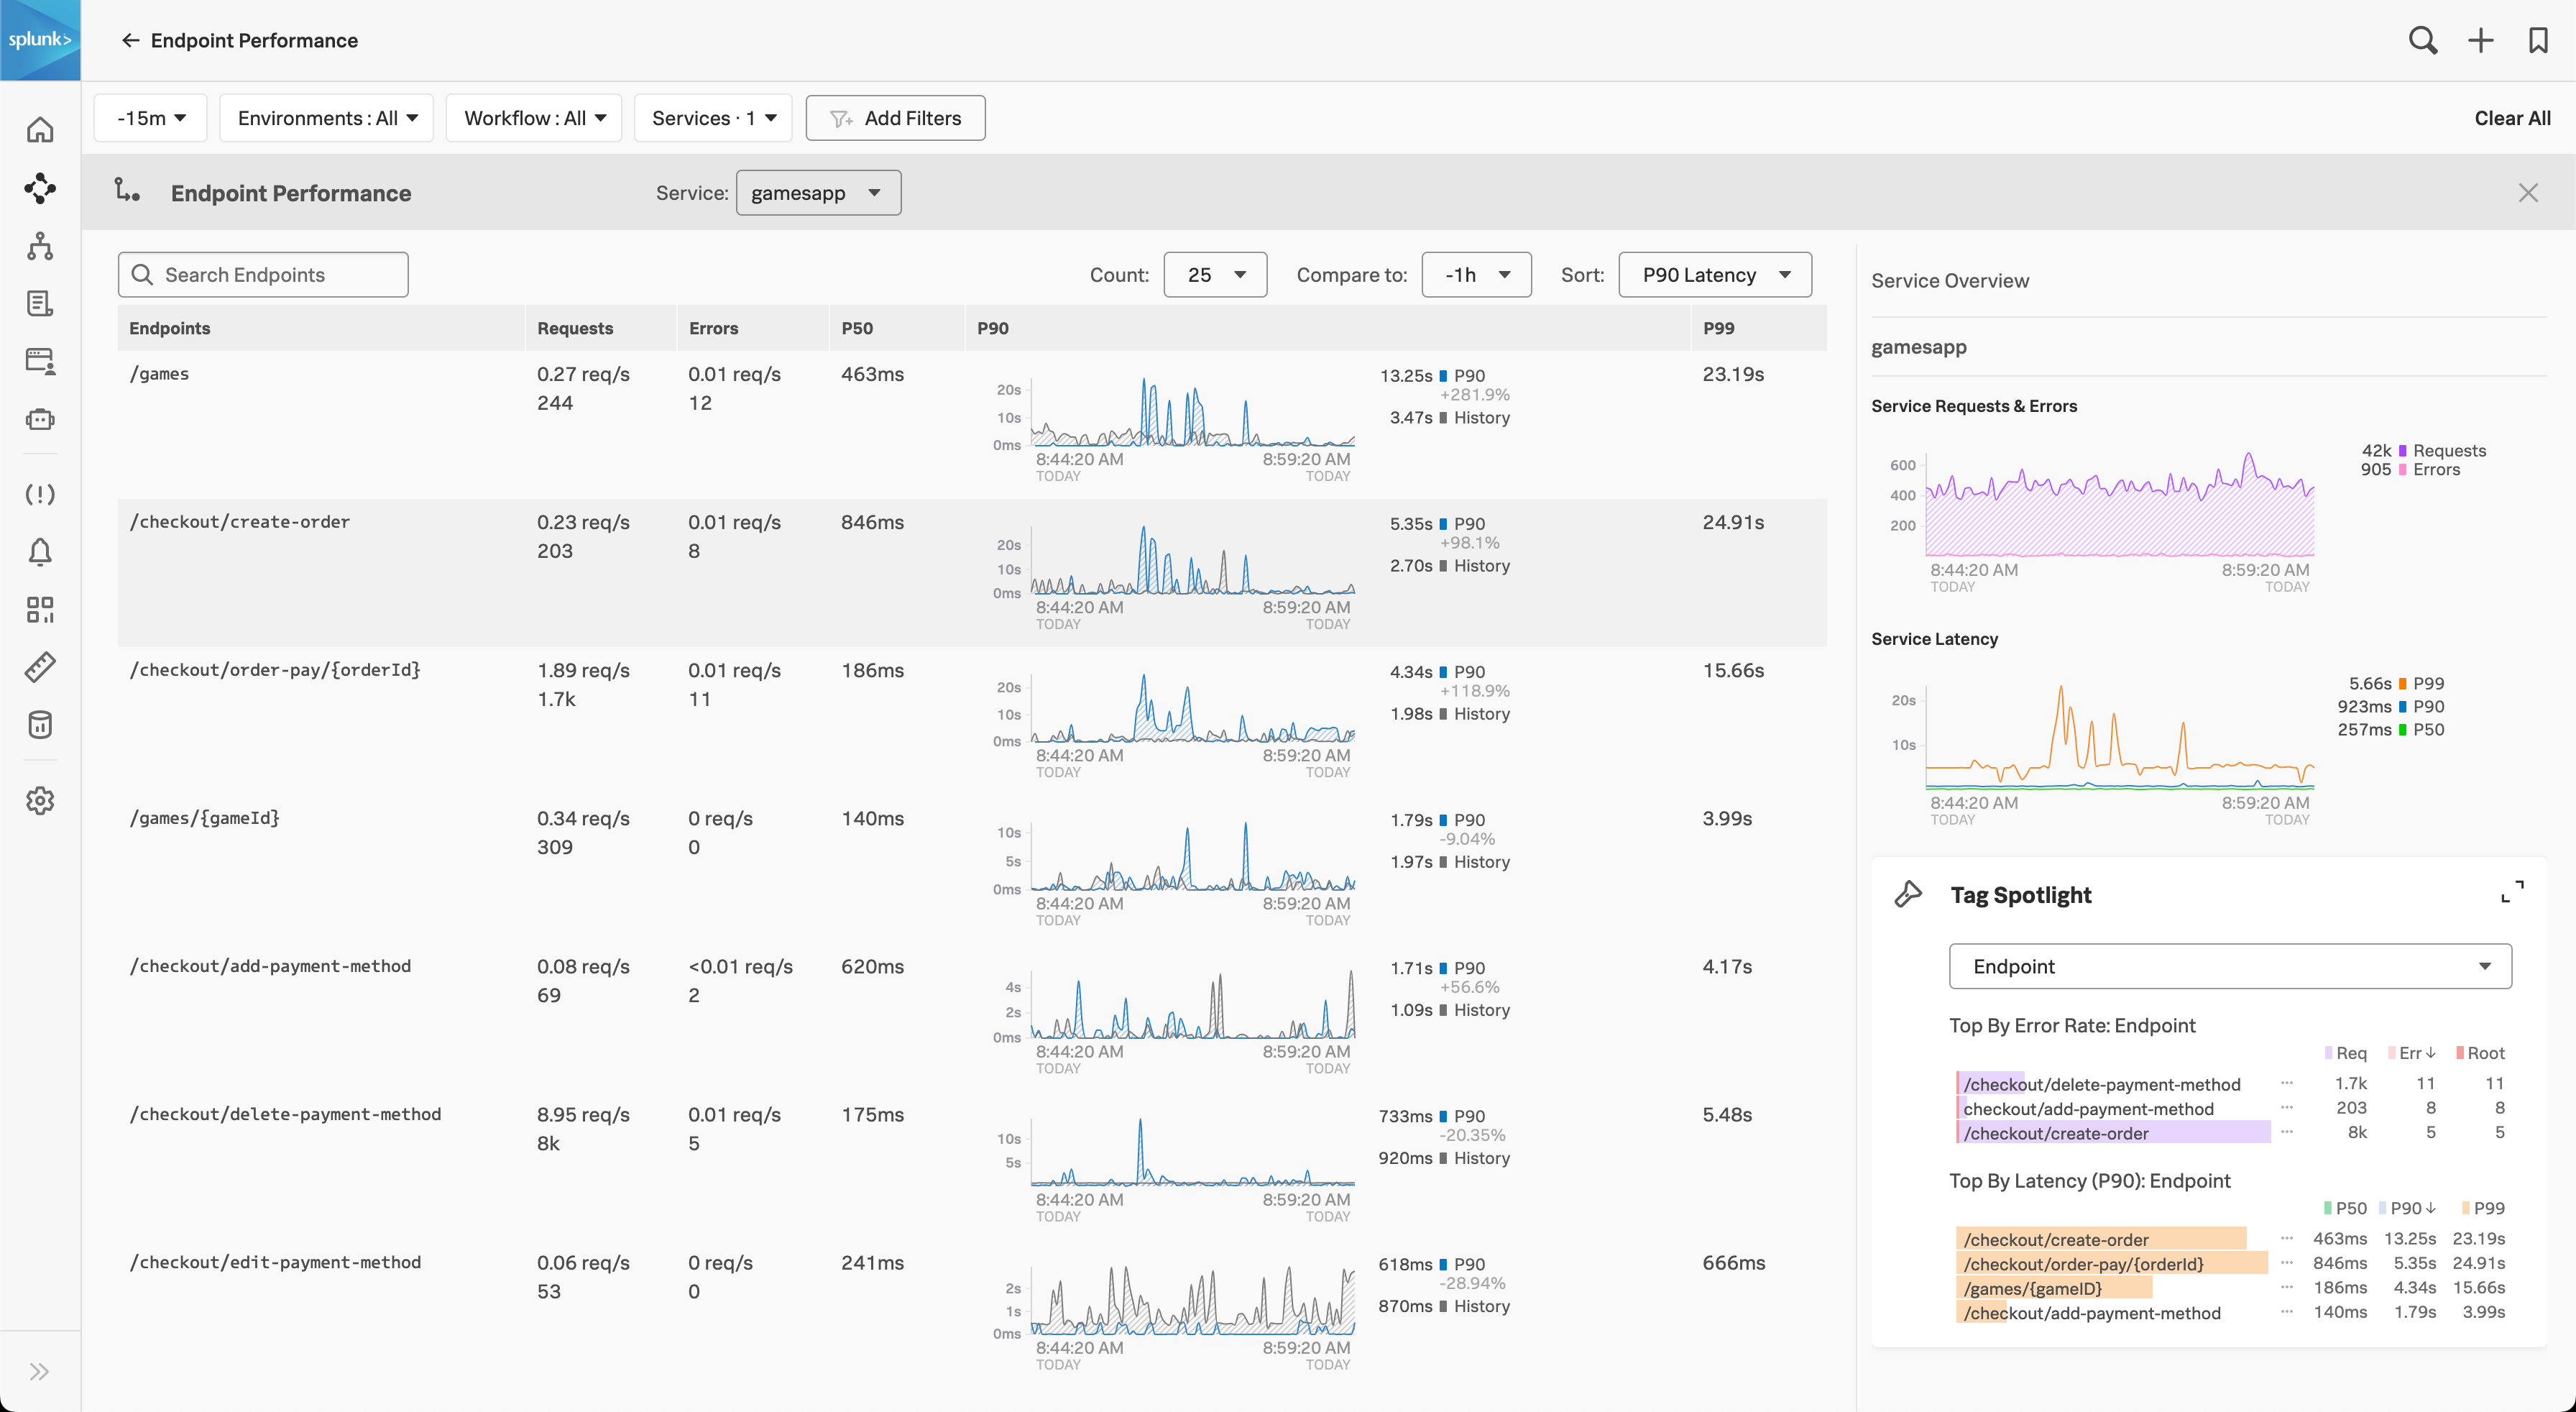 This screenshot shows the endpoint performance page